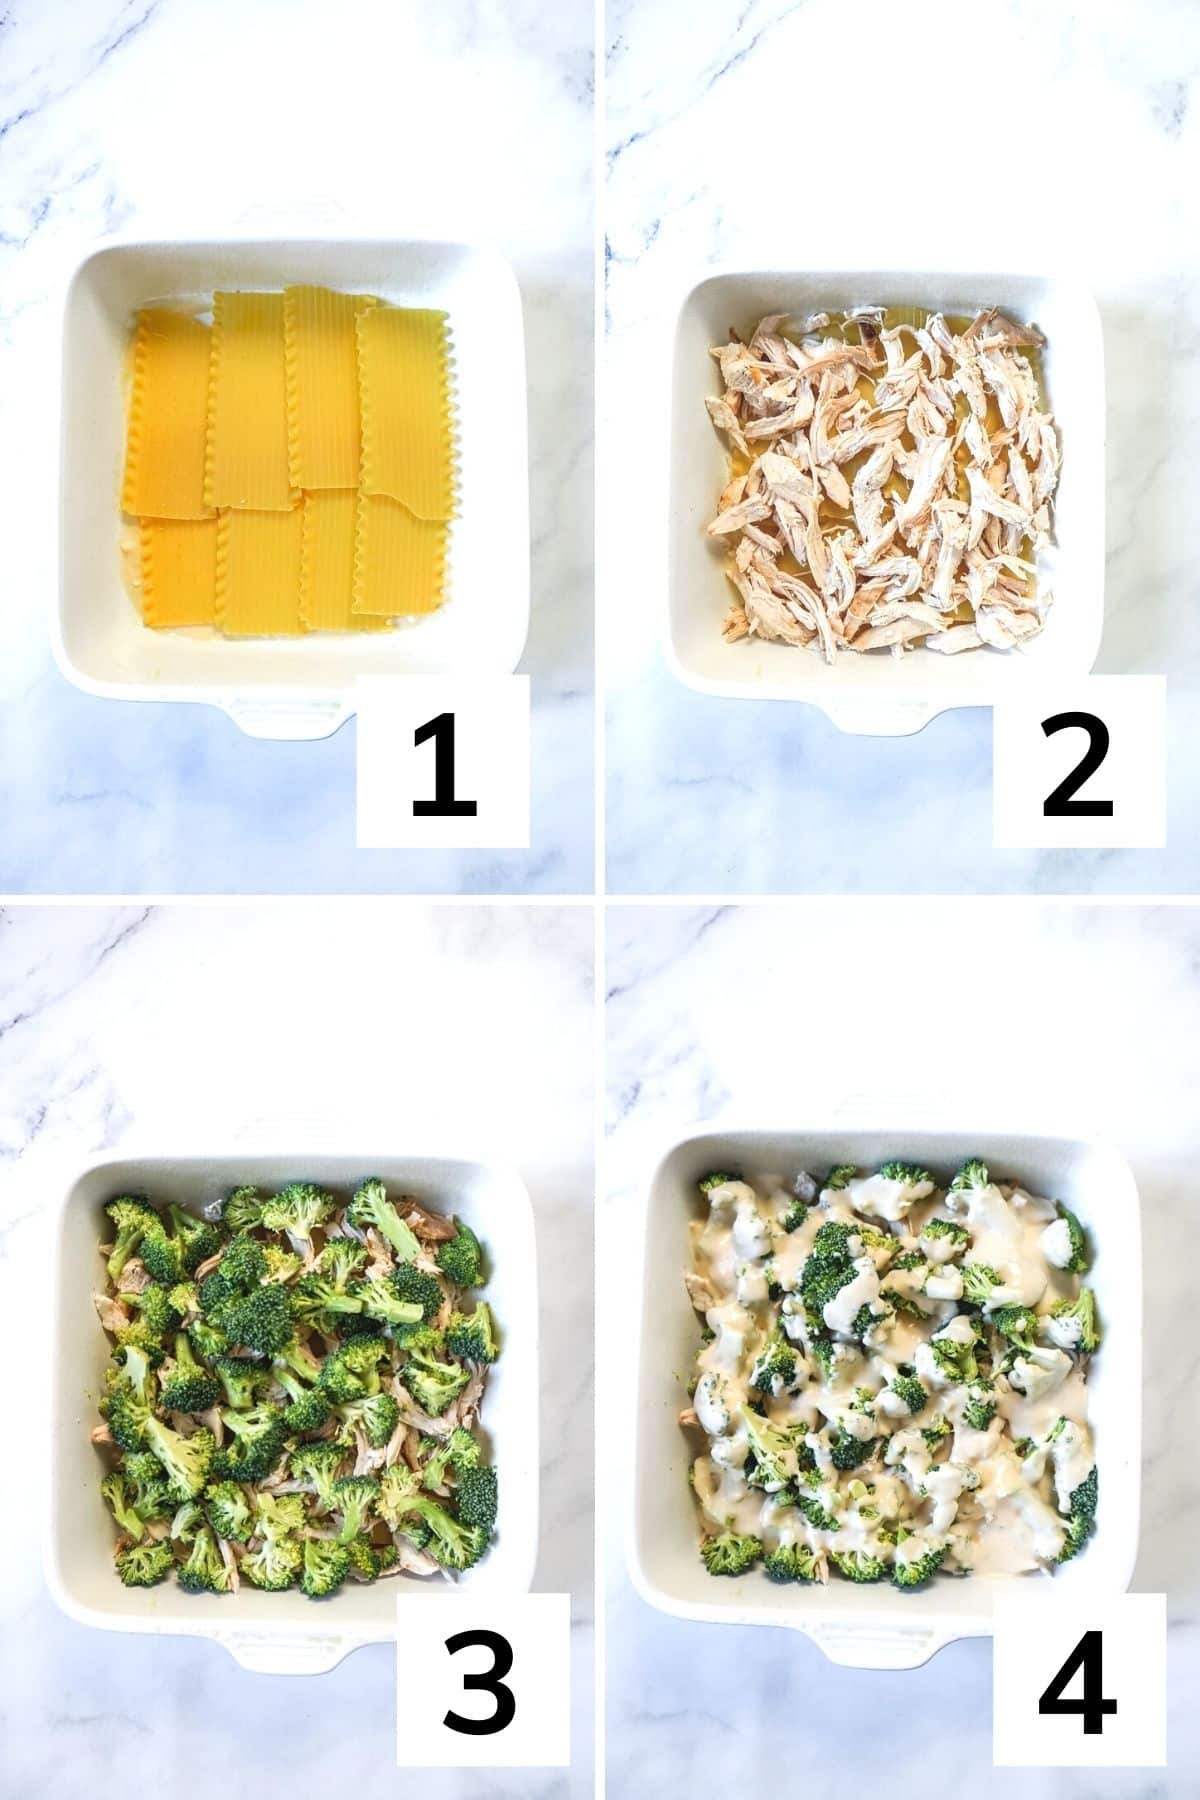 how to make chicken broccoli lasagna step by step.